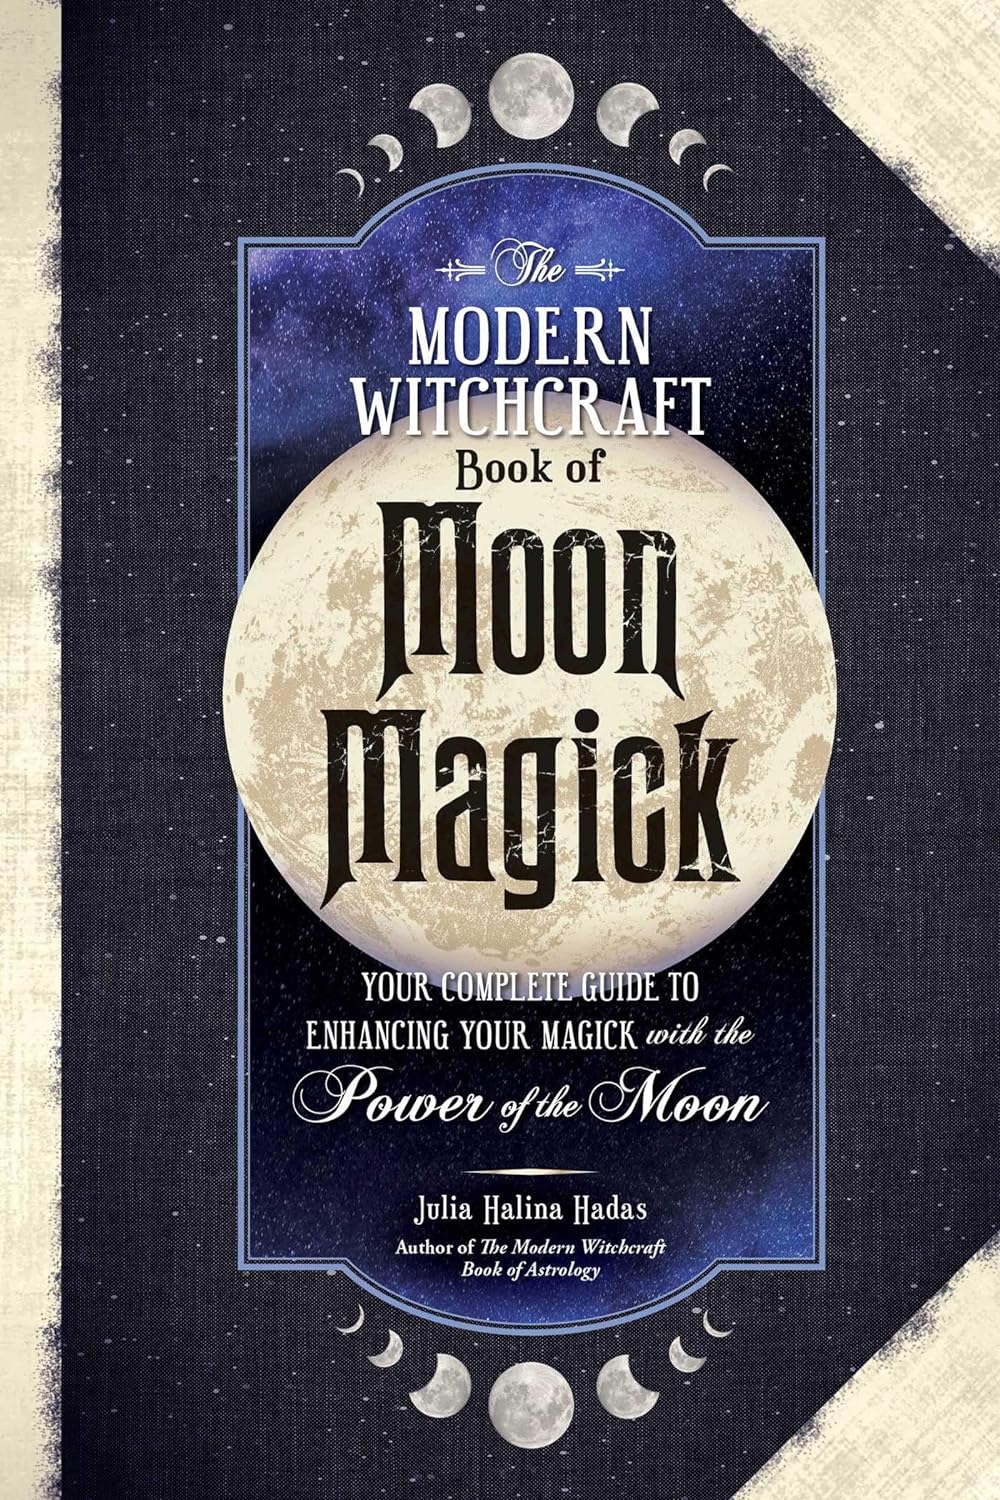 The Modern Witchcraft Book of Moon Magick: Your Complete Guide to Enhancing Your Magick with the Power of the Moon by Julia Halina Hadas